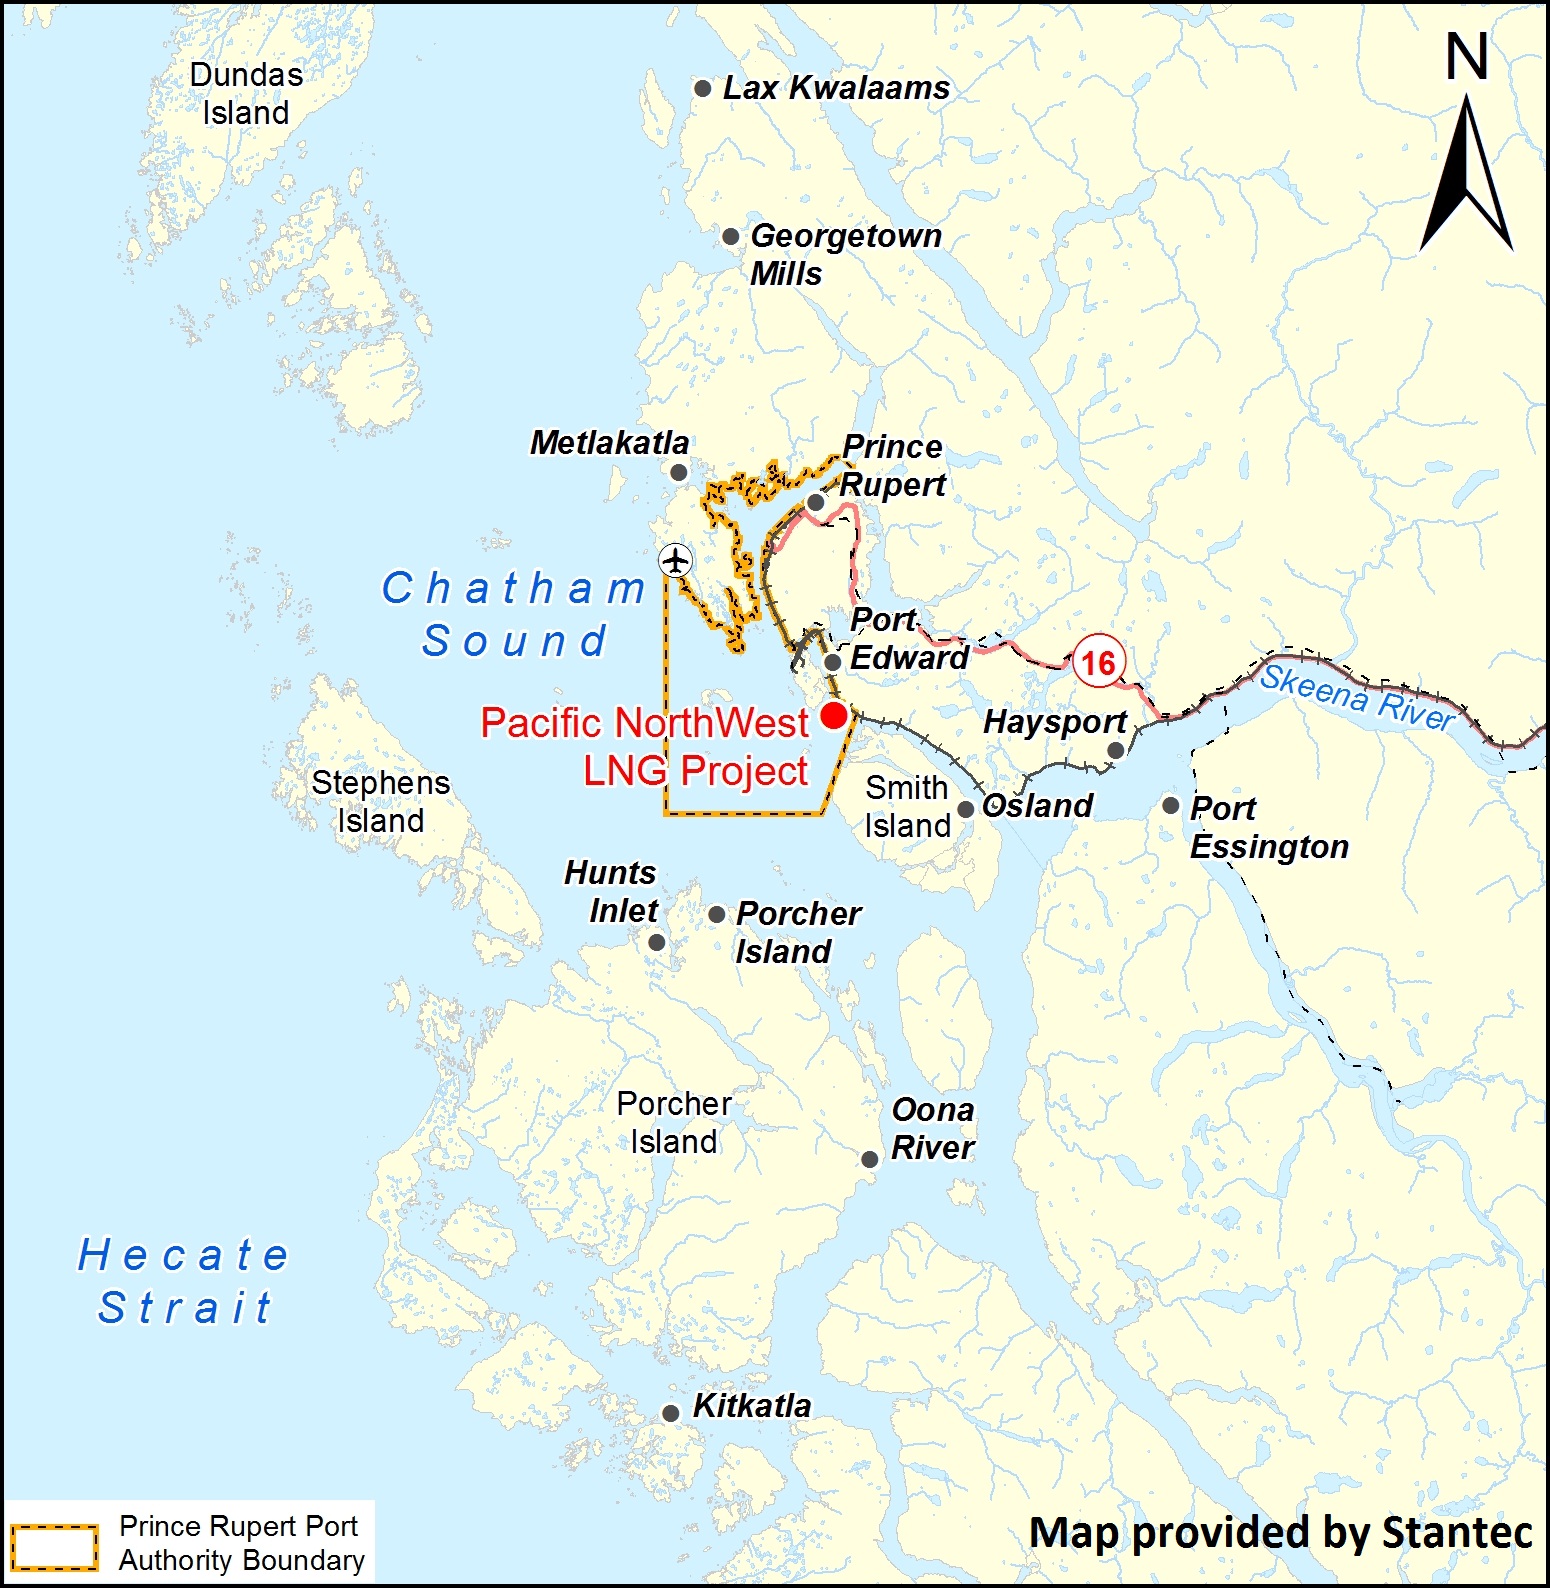 Map provided by Stantec depicting the location of the project, as described in the current document.